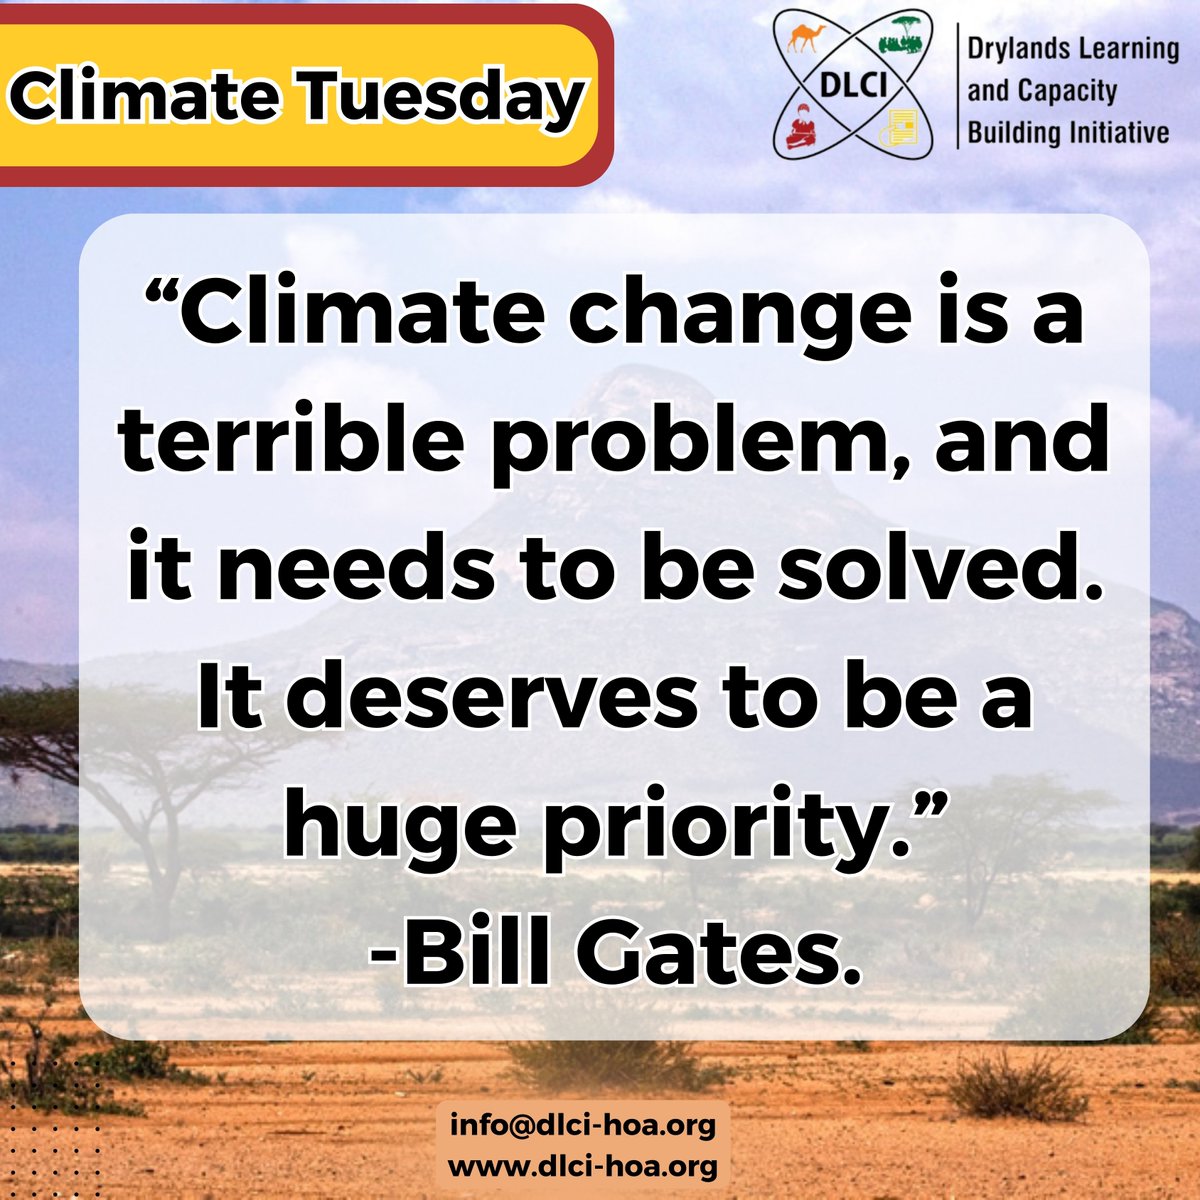 'Climate change is a terrible problem, and it needs to be solved. It deserves to be a huge priority.”-Bill Gates. #ClimateActionNow #ClimateTuesdays